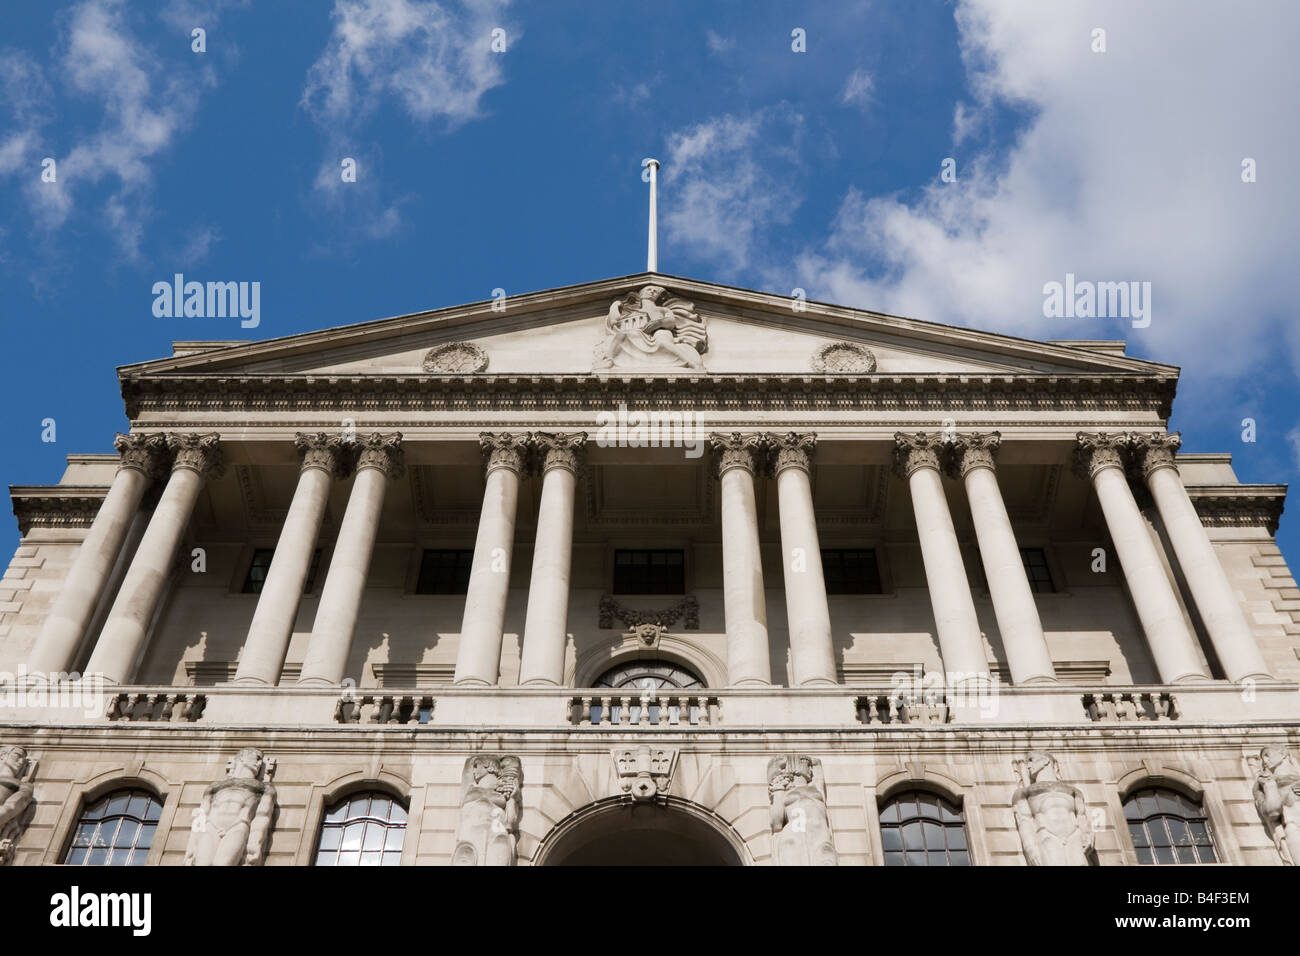 The Bank of England building in the City of London, England Stock Photo